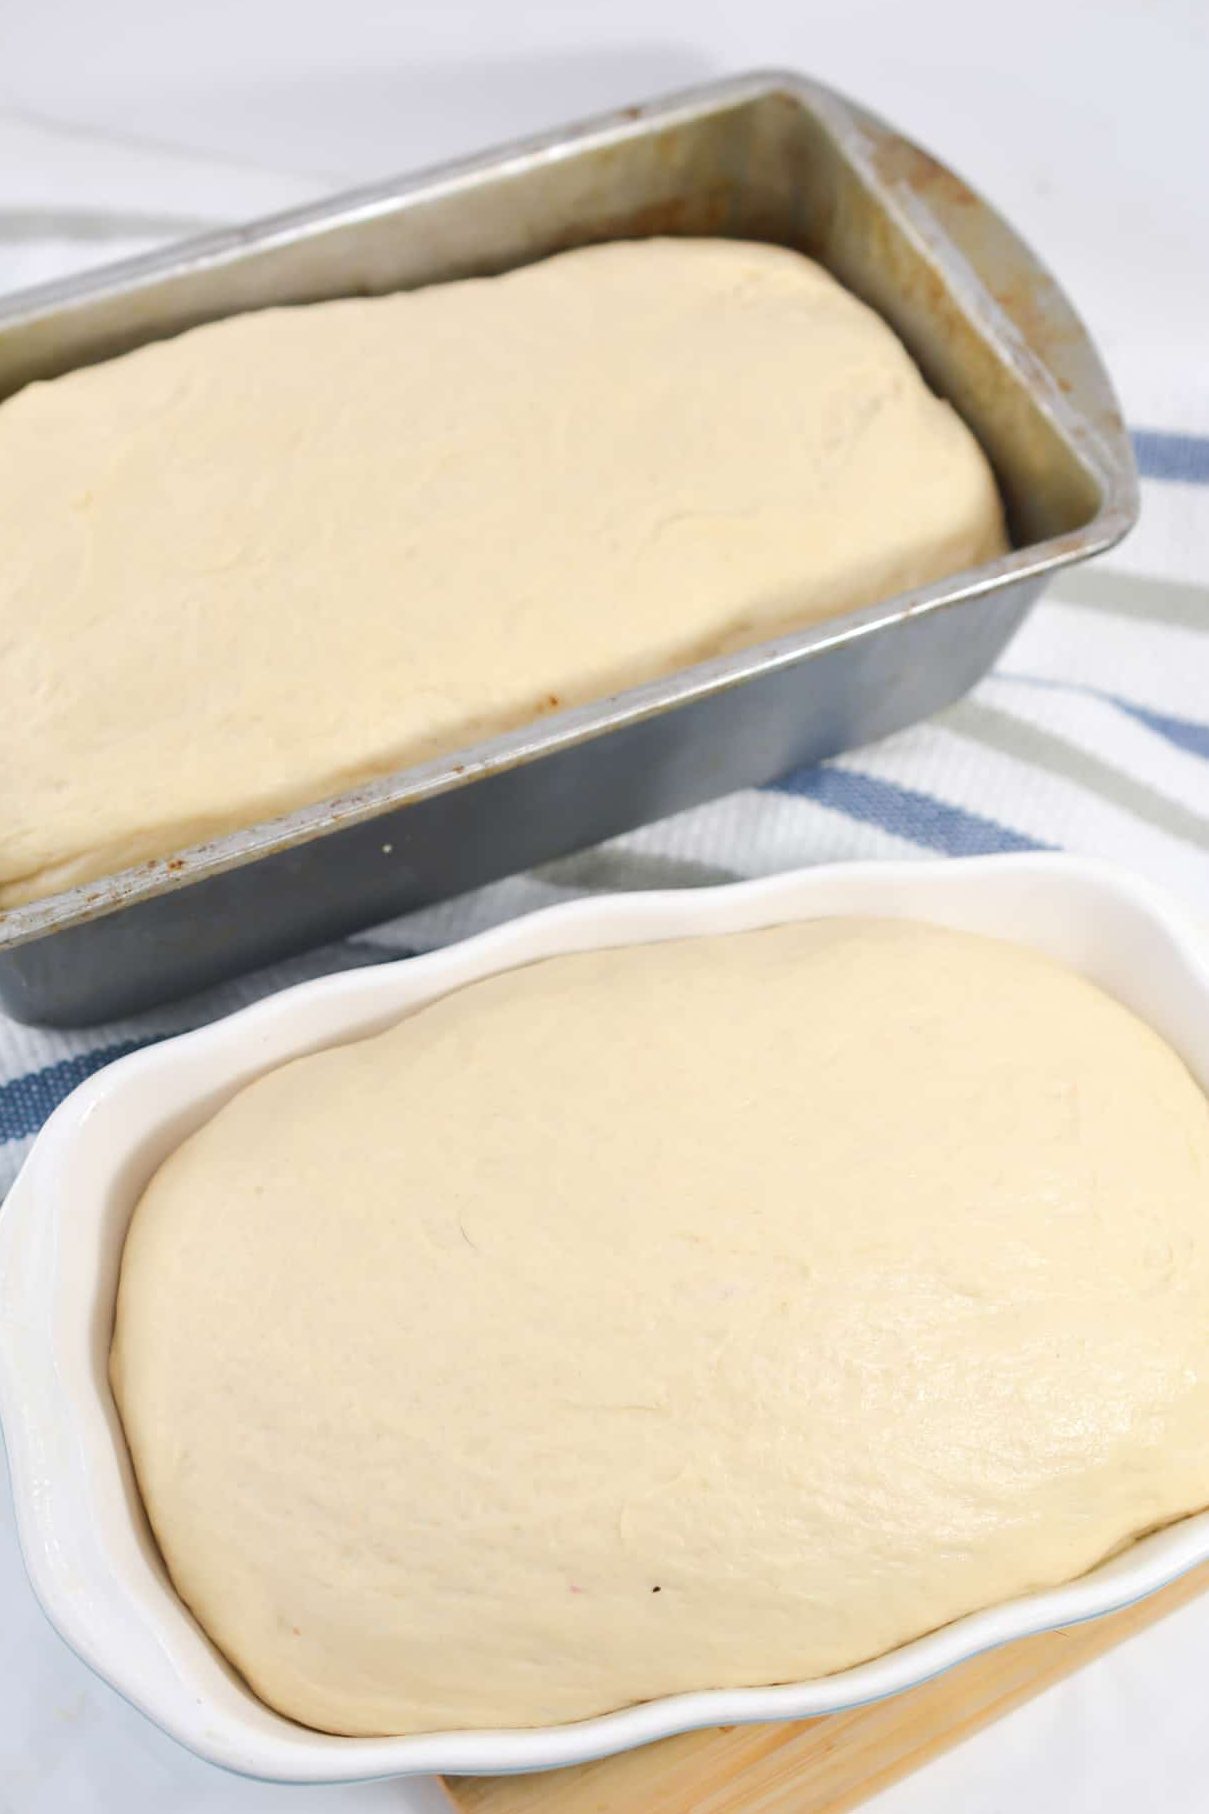 Place the dough into a large bowl that has been coated in cooking spray, cover with a damp cloth